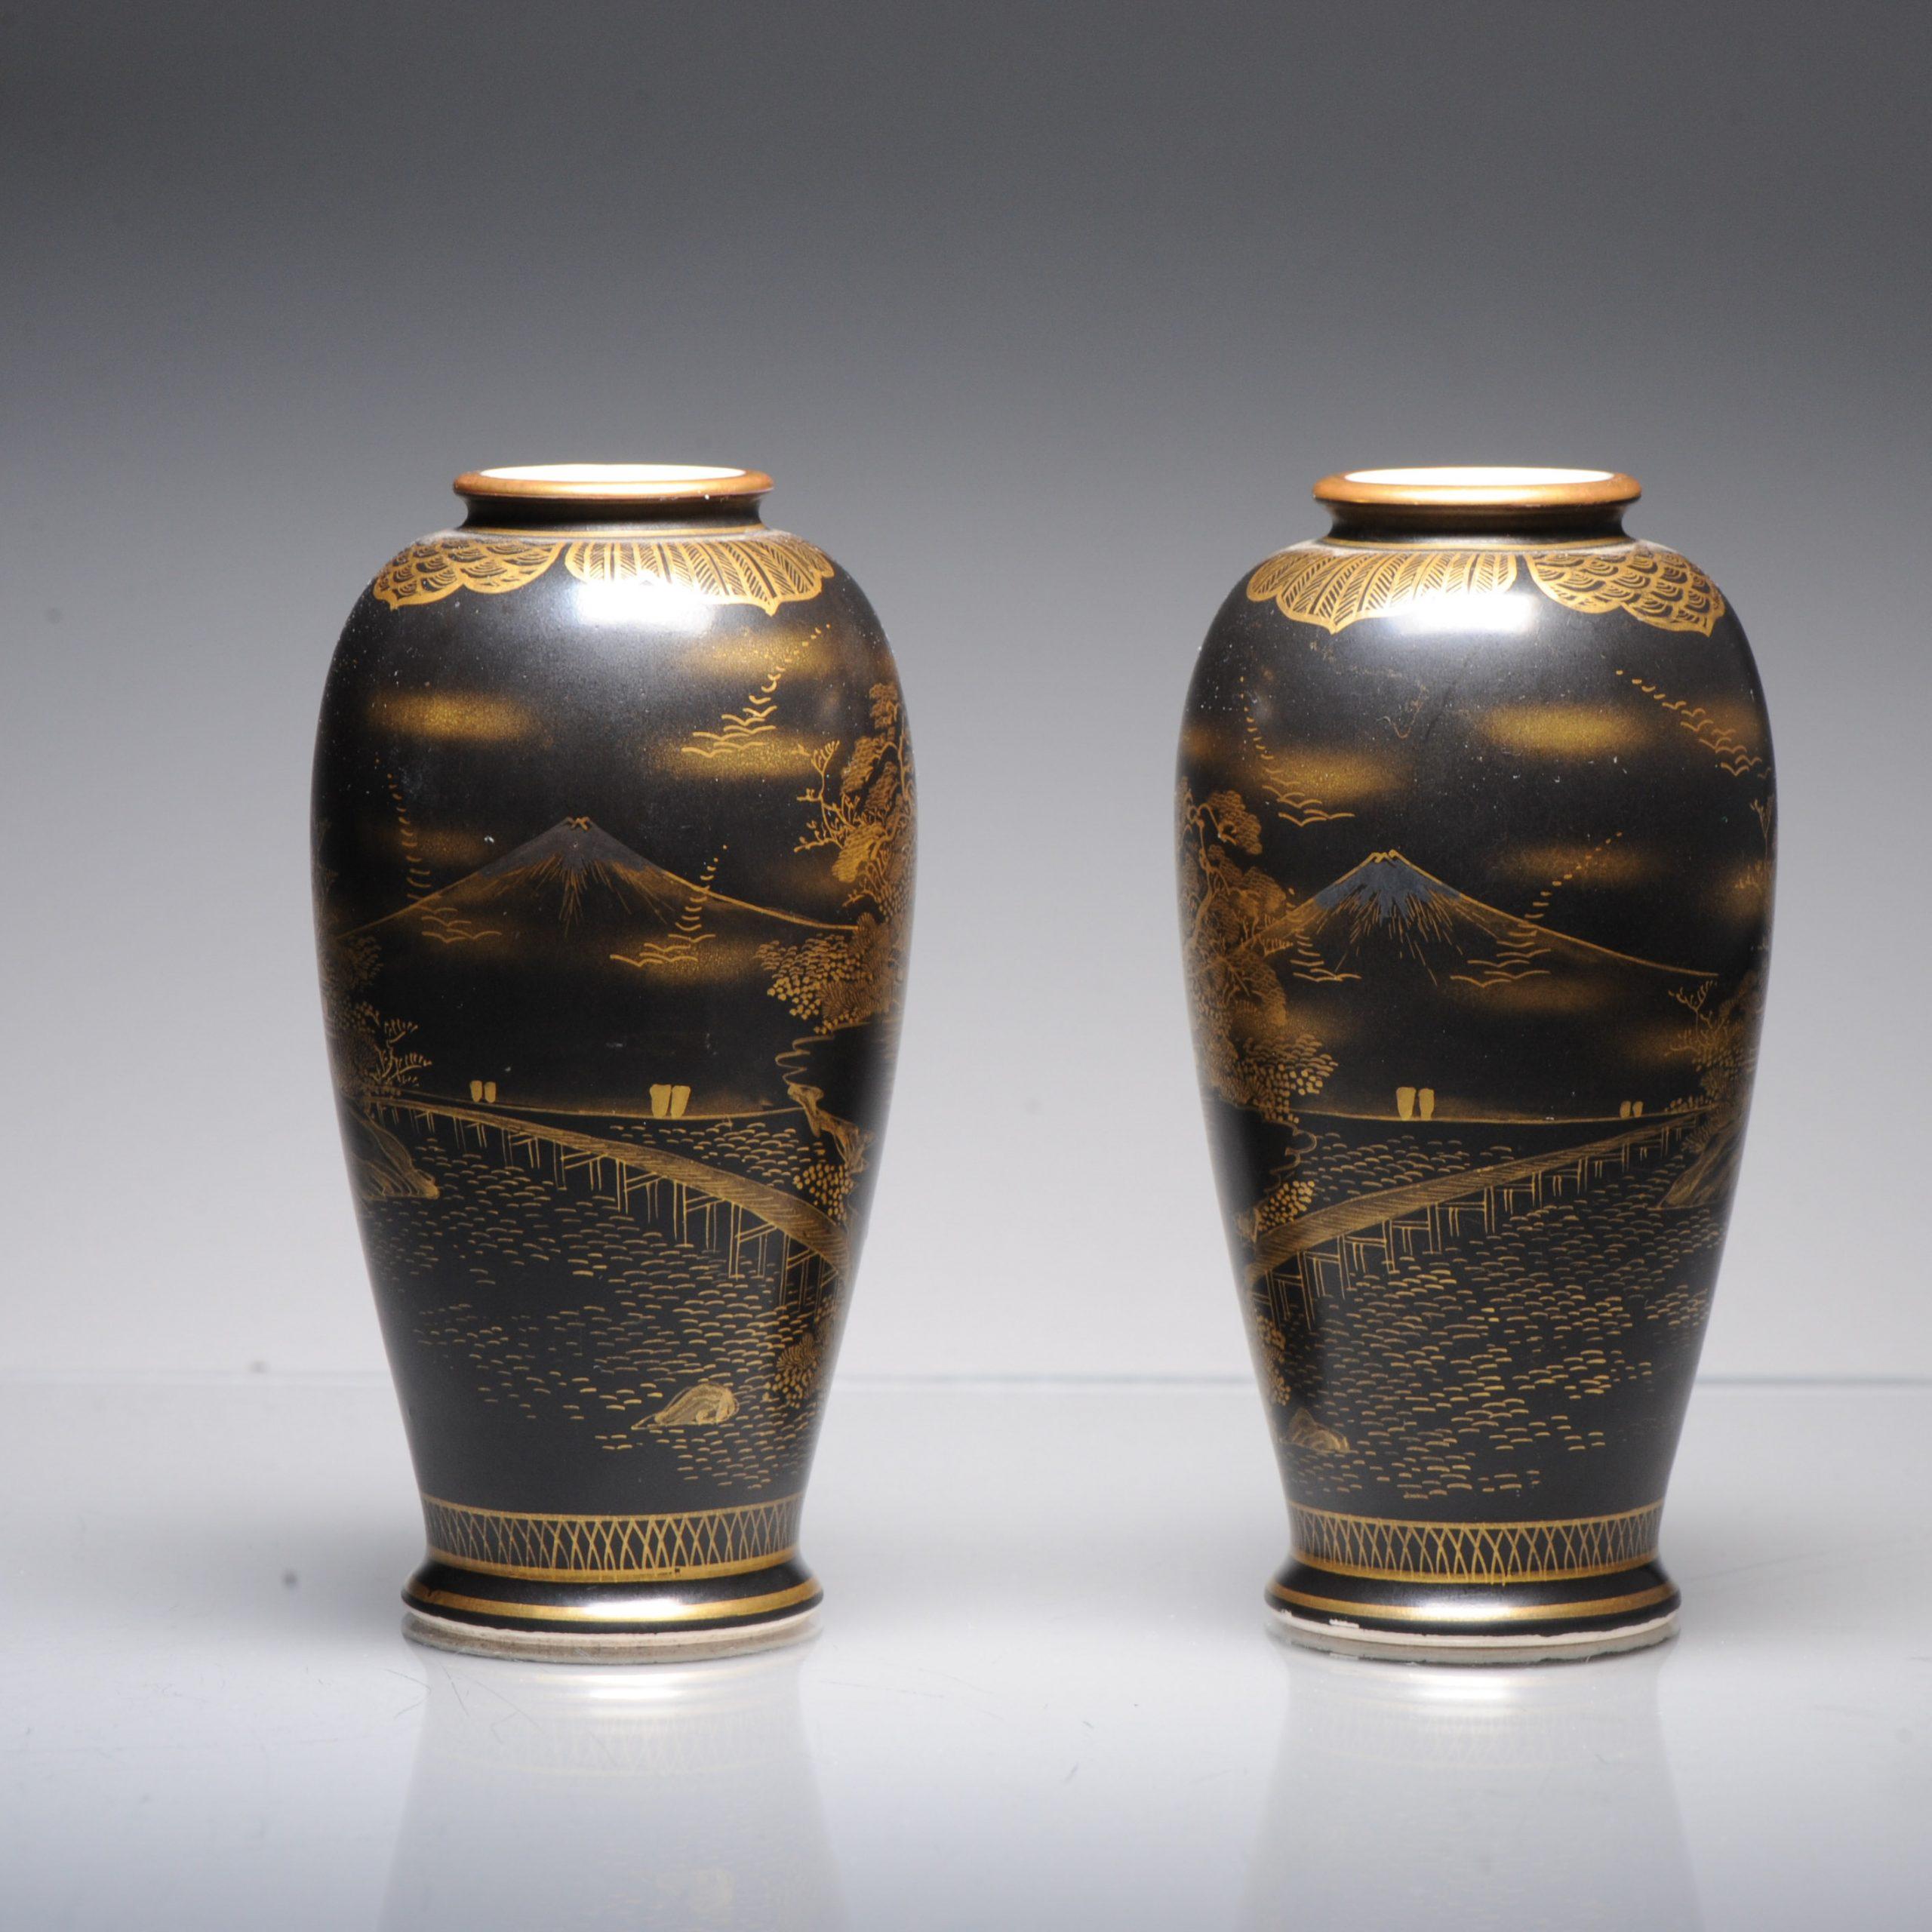 Description
A pair of Japanese Satsuma black-ground vases, Uchida marks, Meiji/Taisho period
Of ovoid form with everted rims, painted in gilt with scenes of Mount Fuji against a black ground.

Marked: